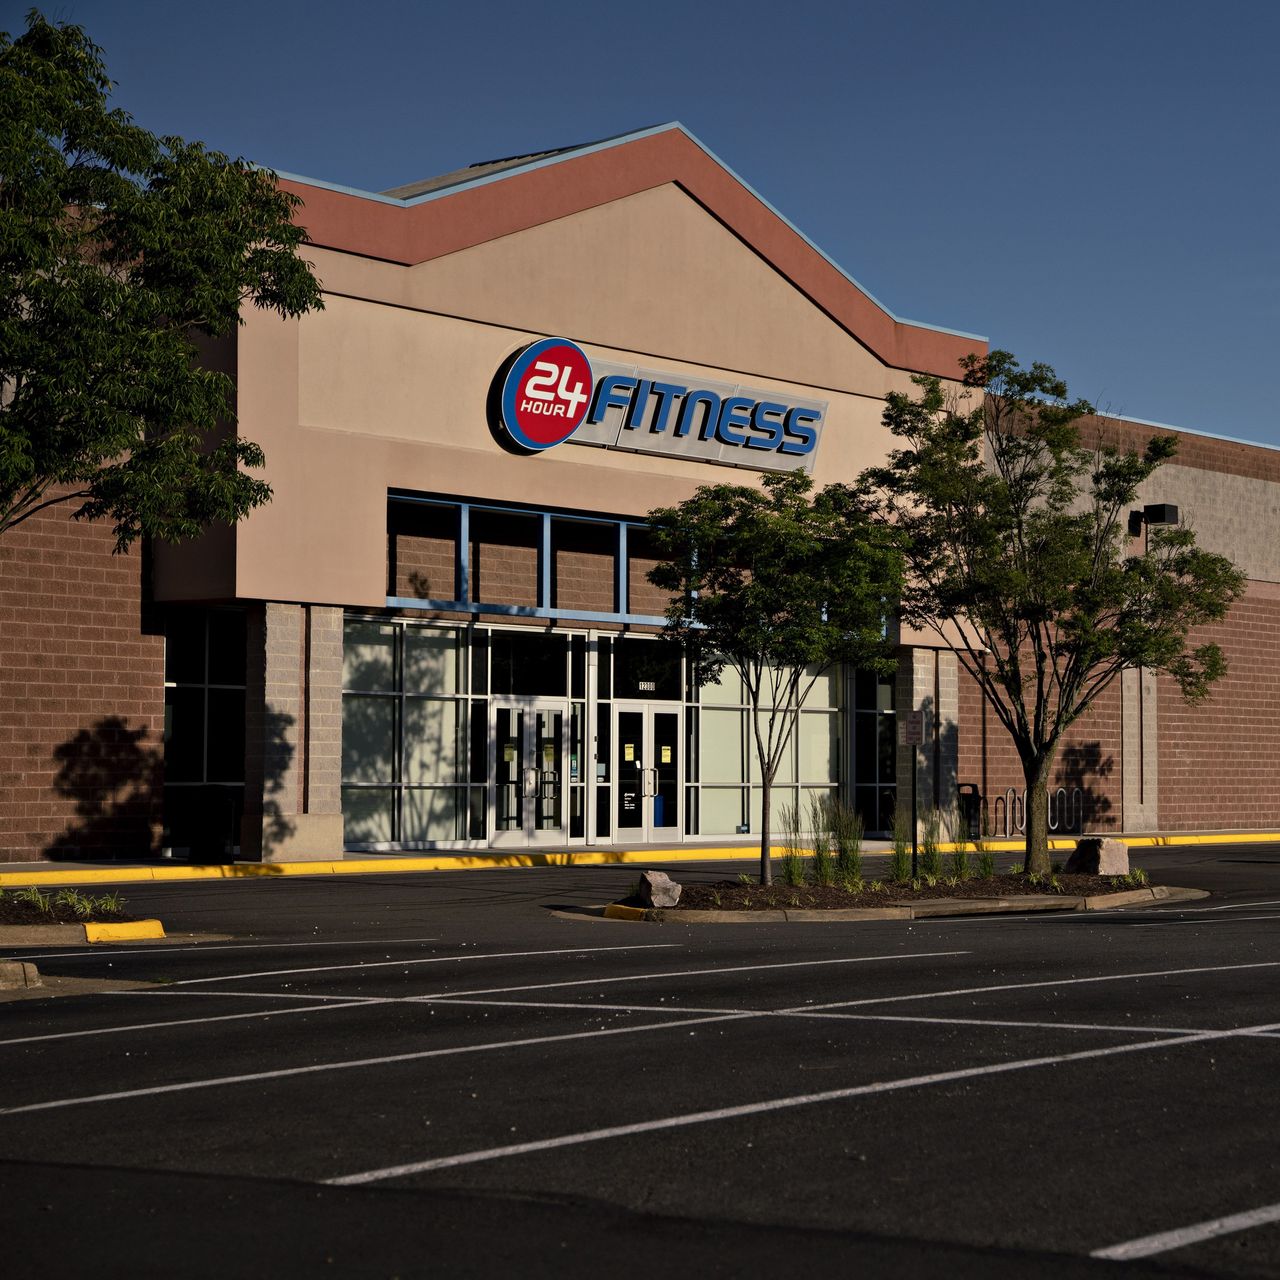 Simple Is 24hr fitness going out of business for Build Muscle